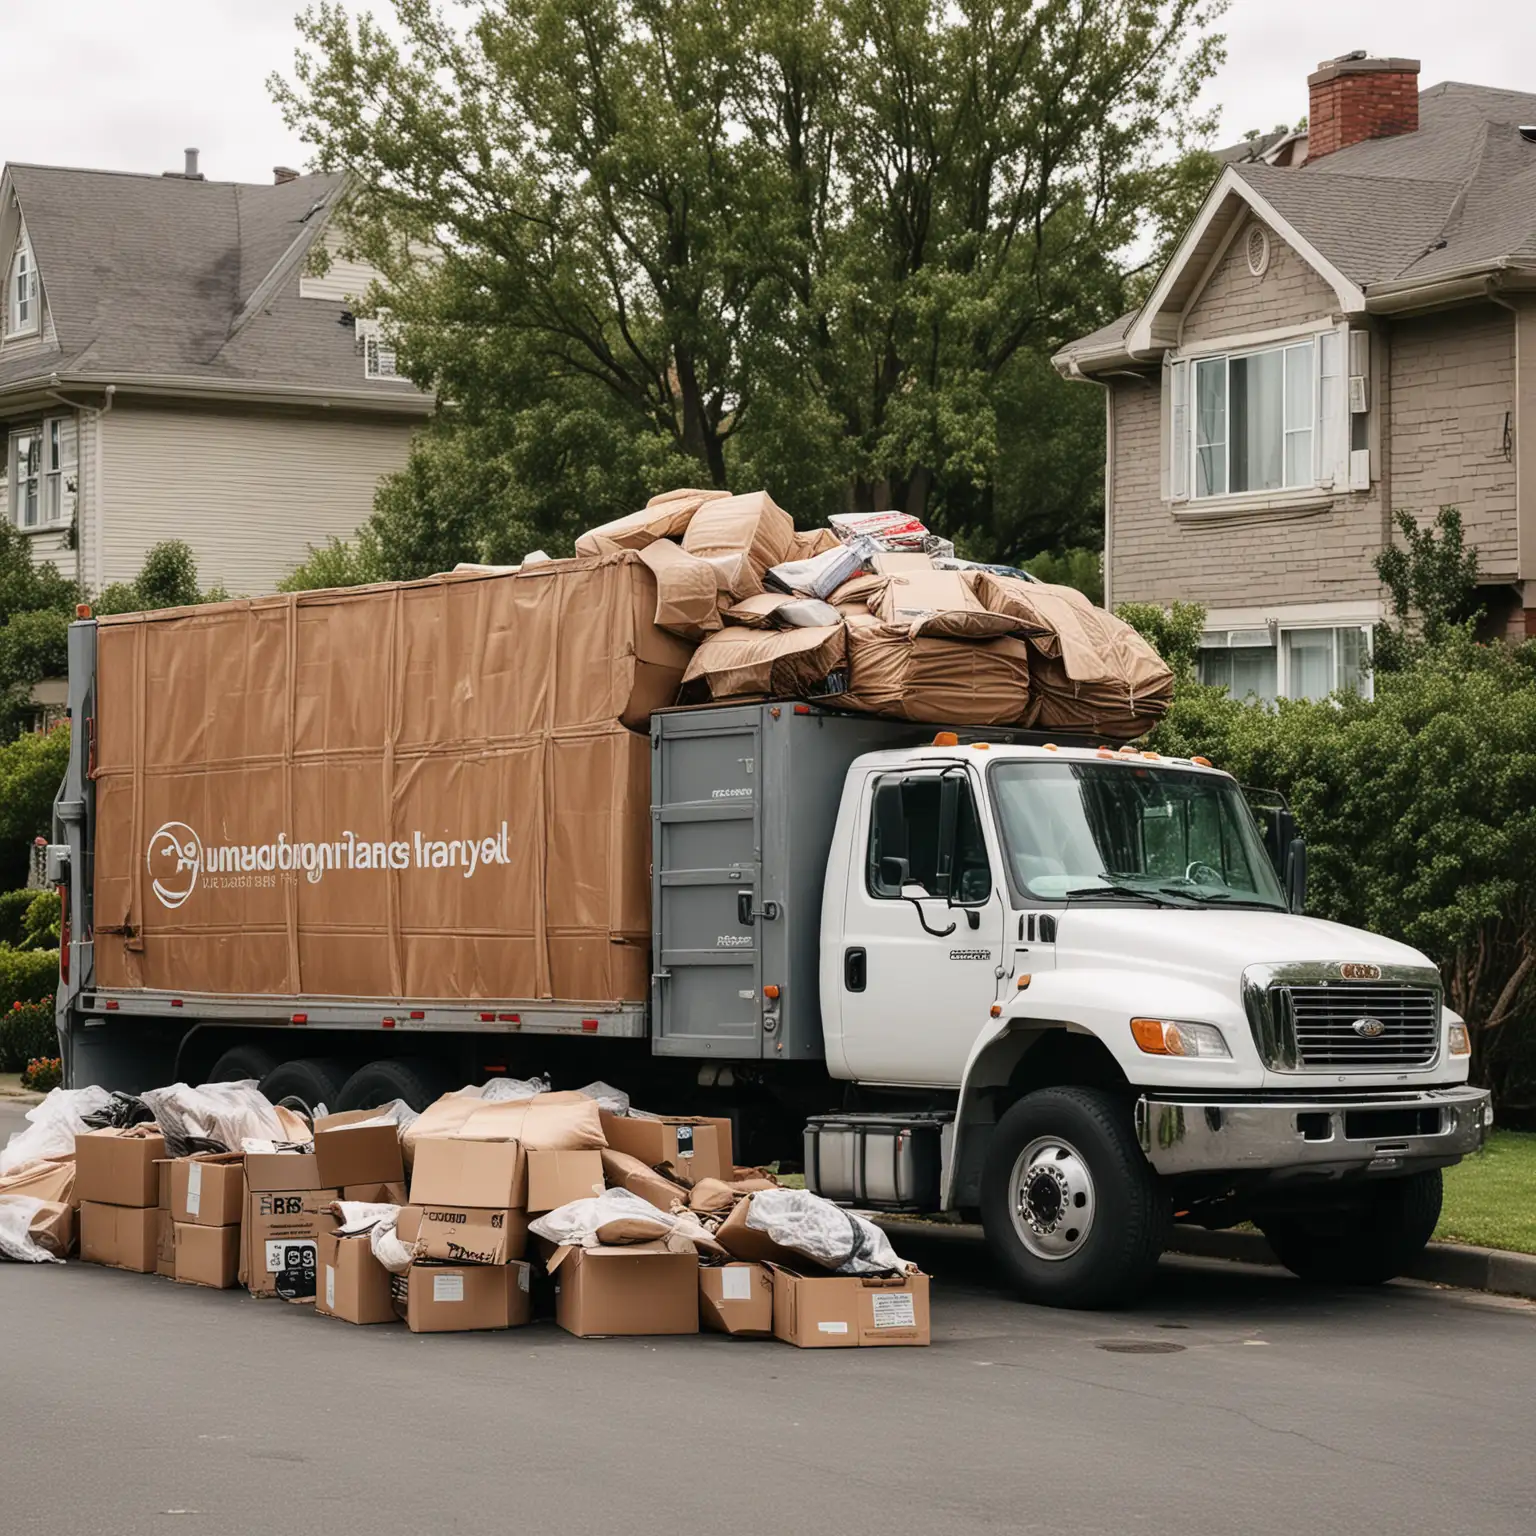 Create a high-quality photograph depicting a fully loaded junk removal truck from Route Runners Junk Removal. The image should capture the truck parked in front of a residential home or an office, showcasing a pile of assorted junk—such as furniture, electronics, and boxes—neatly loaded and ready for disposal. The scene should convey a sense of completion and relief, illustrating the effective clearing of clutter from the property. Use a DSLR camera with a 50mm lens to capture the entire truck along with some of the environment, ensuring the focus is on the loaded truck while also including a background that suggests the setting of a home or business.